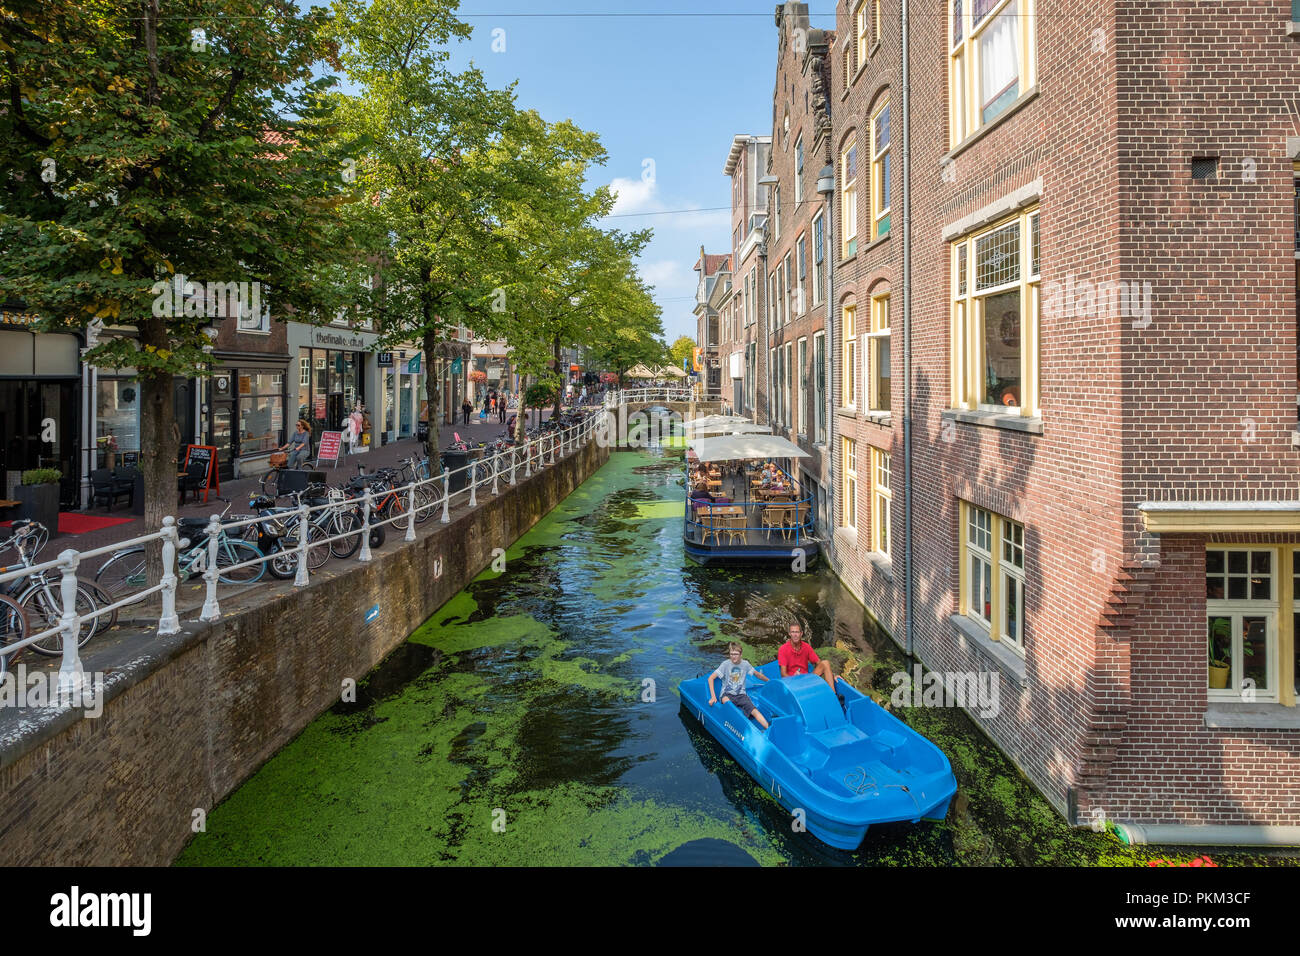 Father and son on a blue water bike sailing in a canal full of duckweed in Delft, the Netherlands. Stock Photo